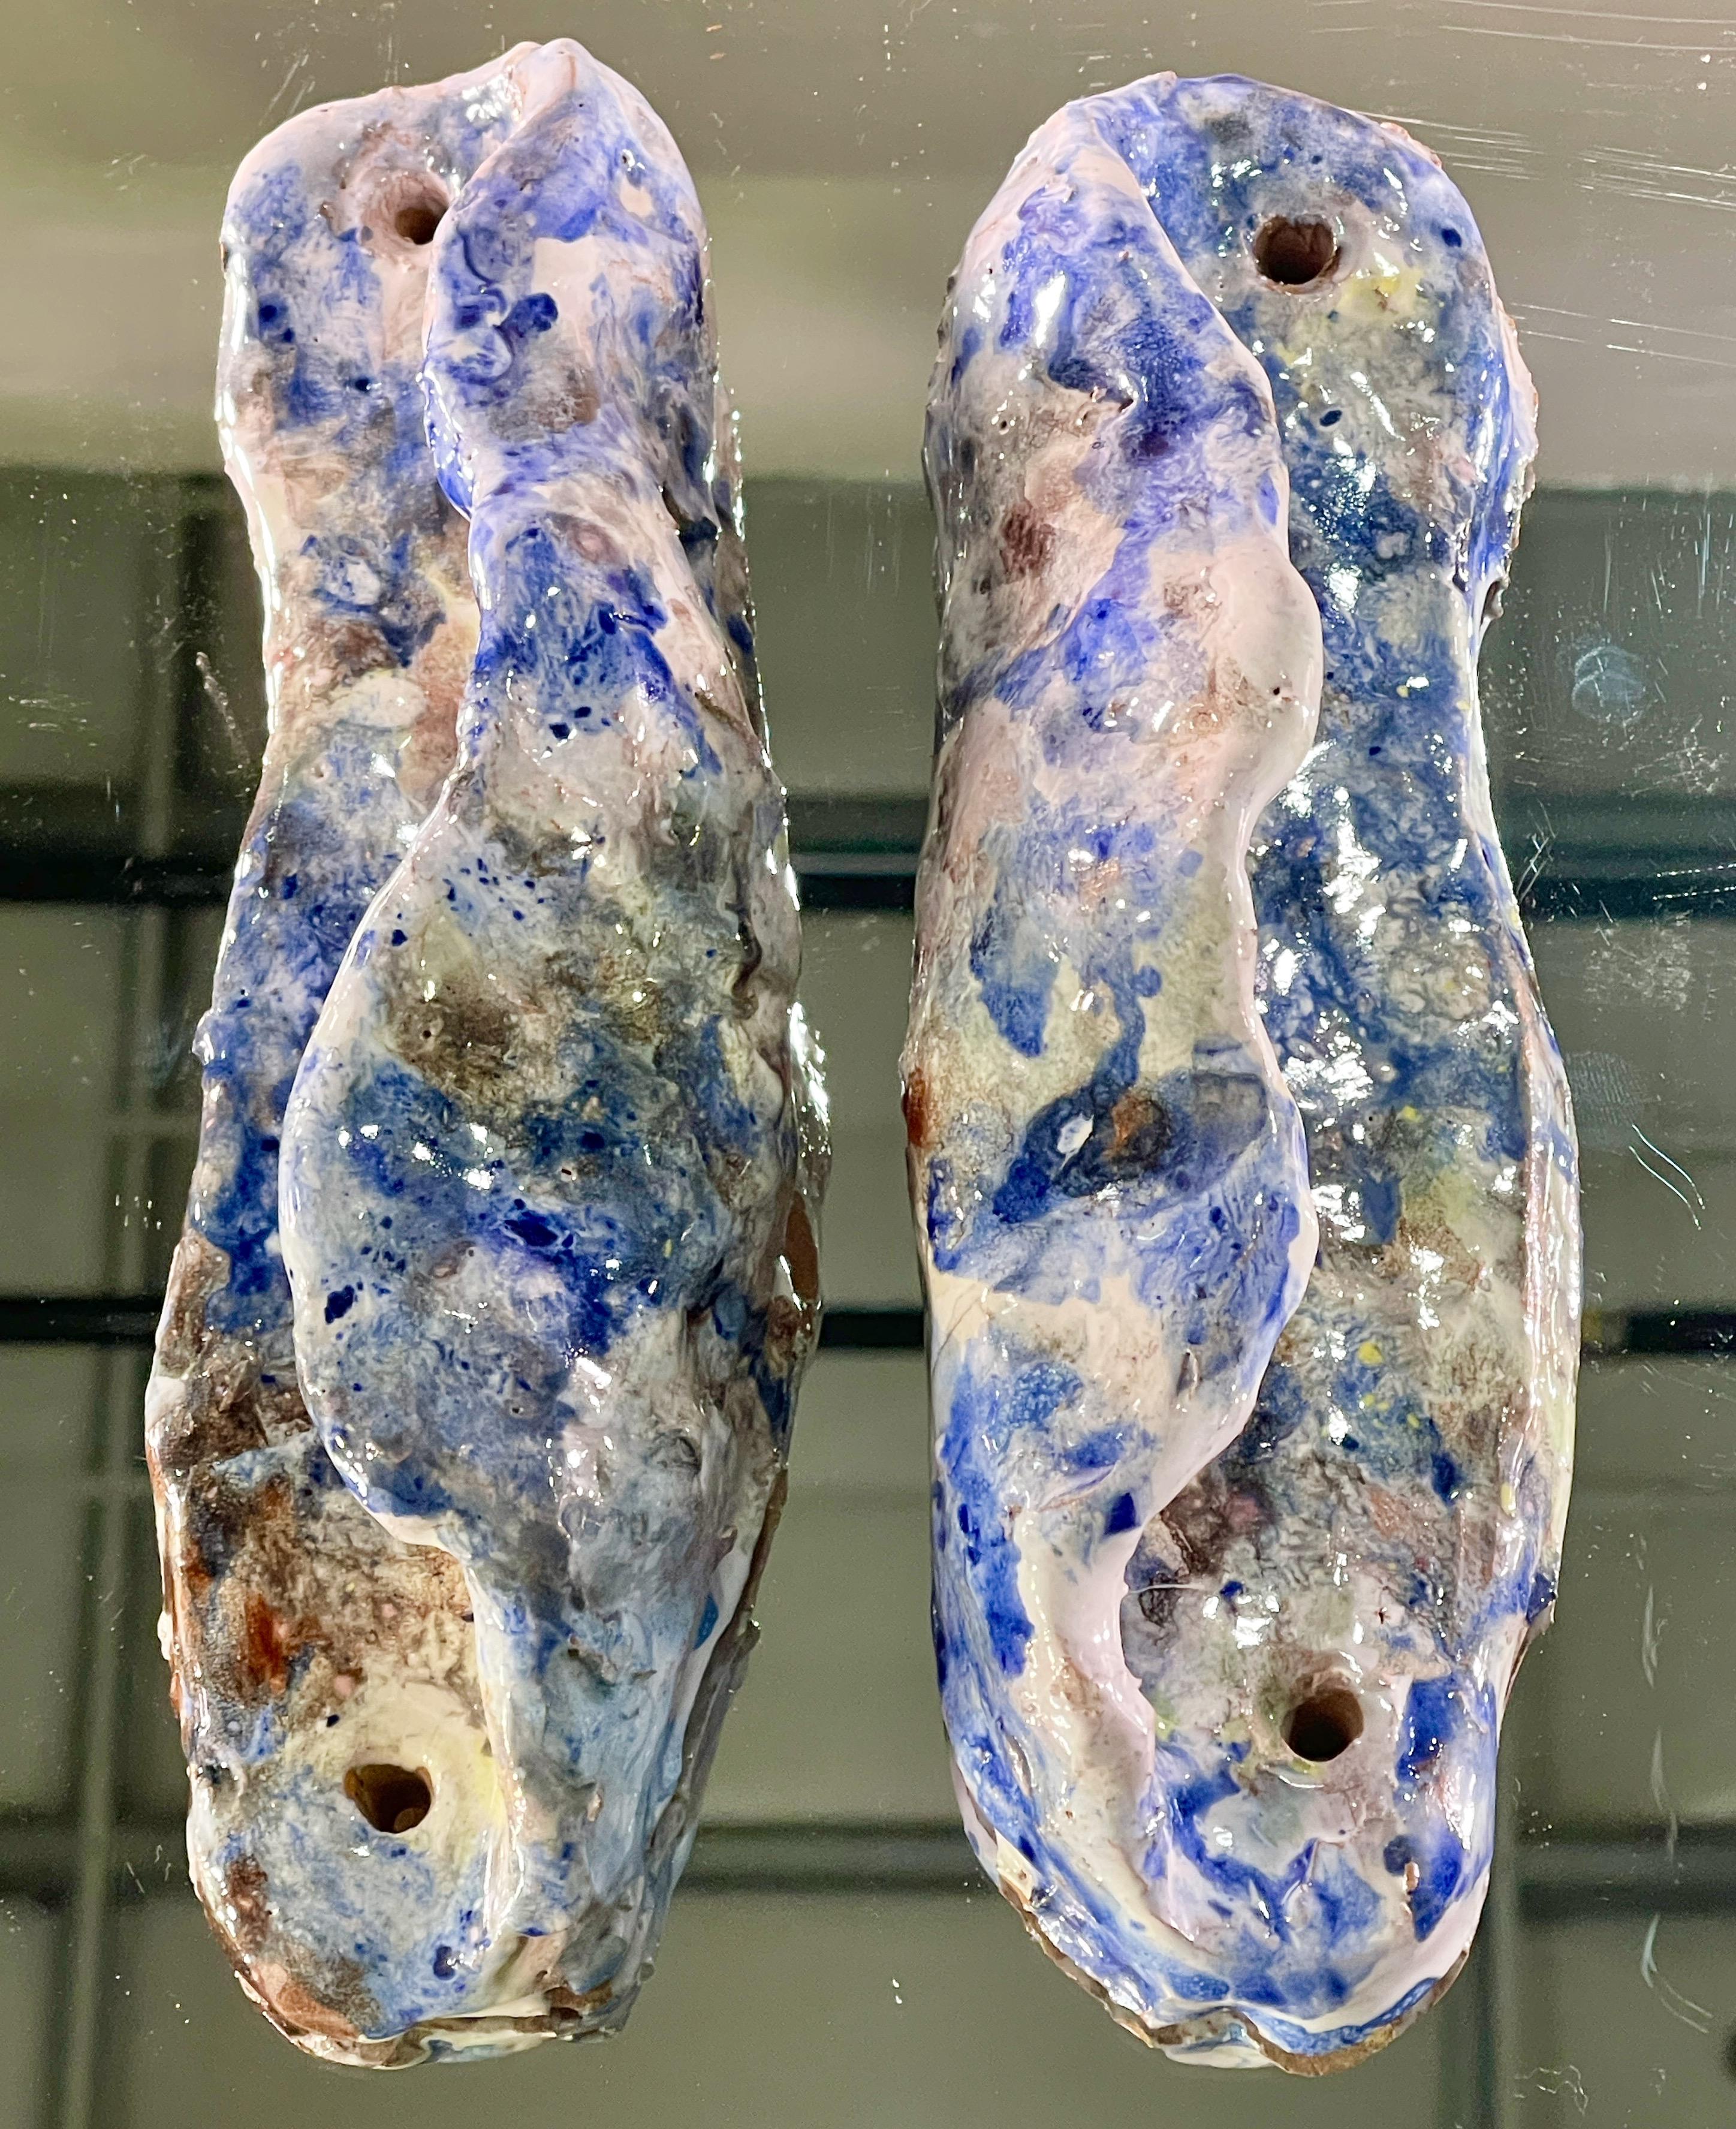 Pair of blue and white glazed ceramic door pulls attributed to Fausto Melotti (1901-1986). See his maniglie for Casa Fornaroli.
Signature indecipherable.
Each with two screw holes. See detail photos for spacing.
Ceramica invetriata maniglie.